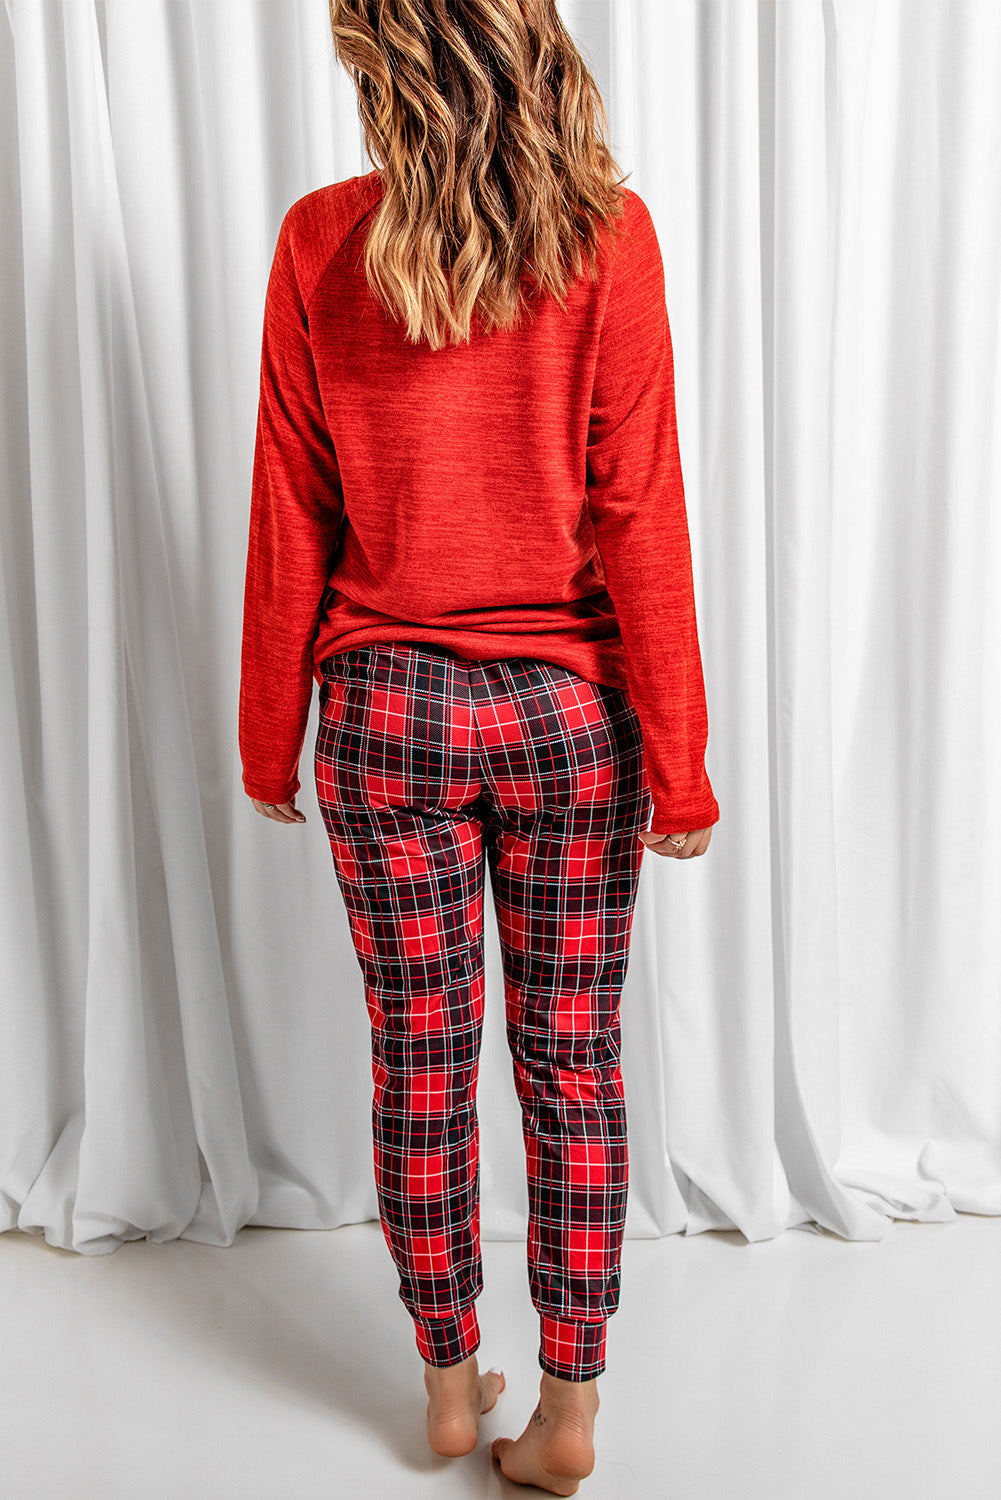 Red MERRY Christmas Graphic Top Plaid Pants Set